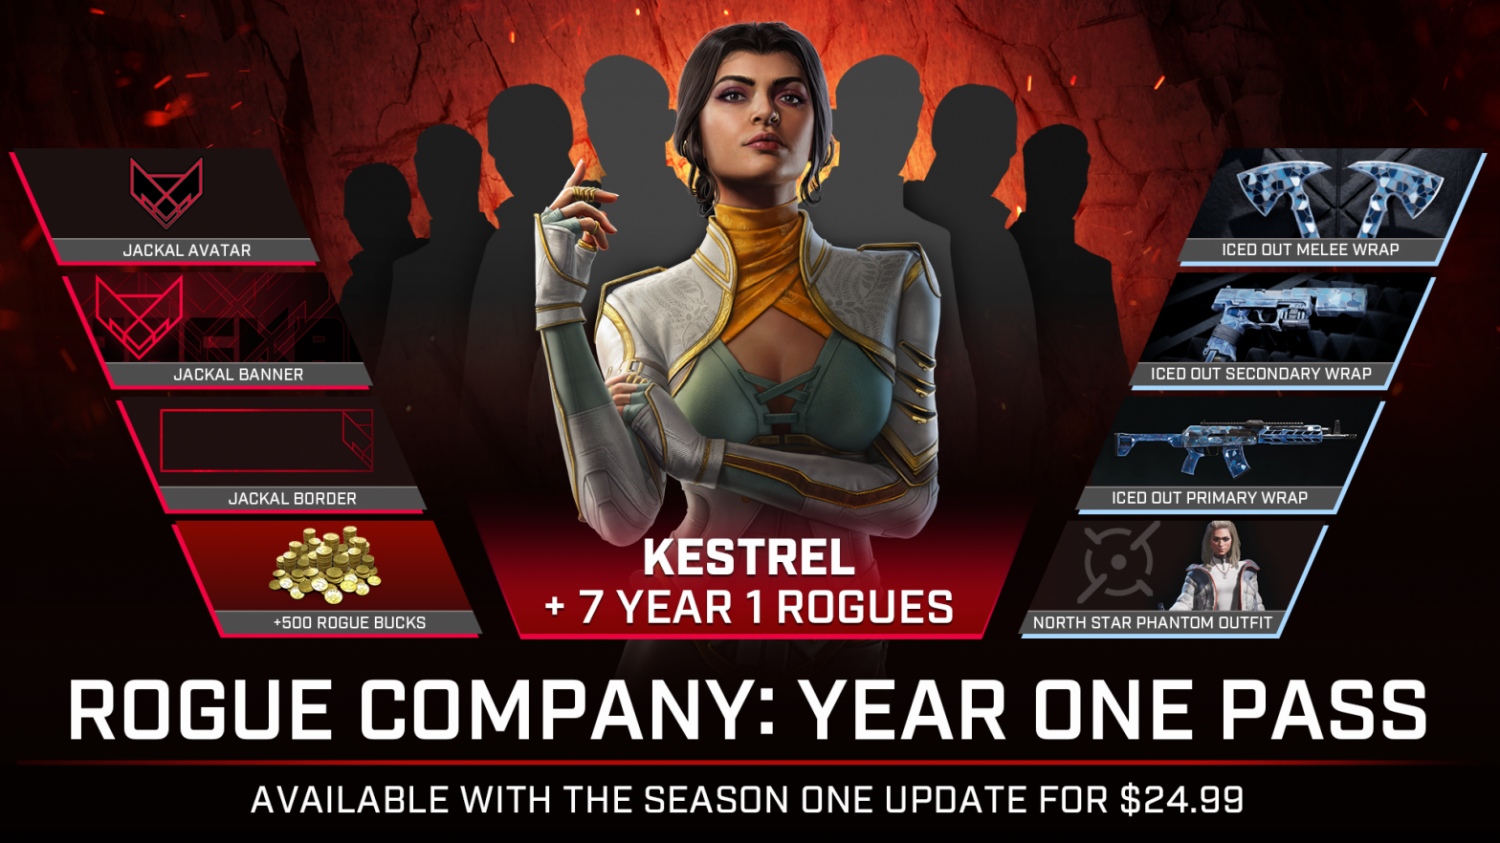 Rogue Company: Year One Pass, Including Kestrel